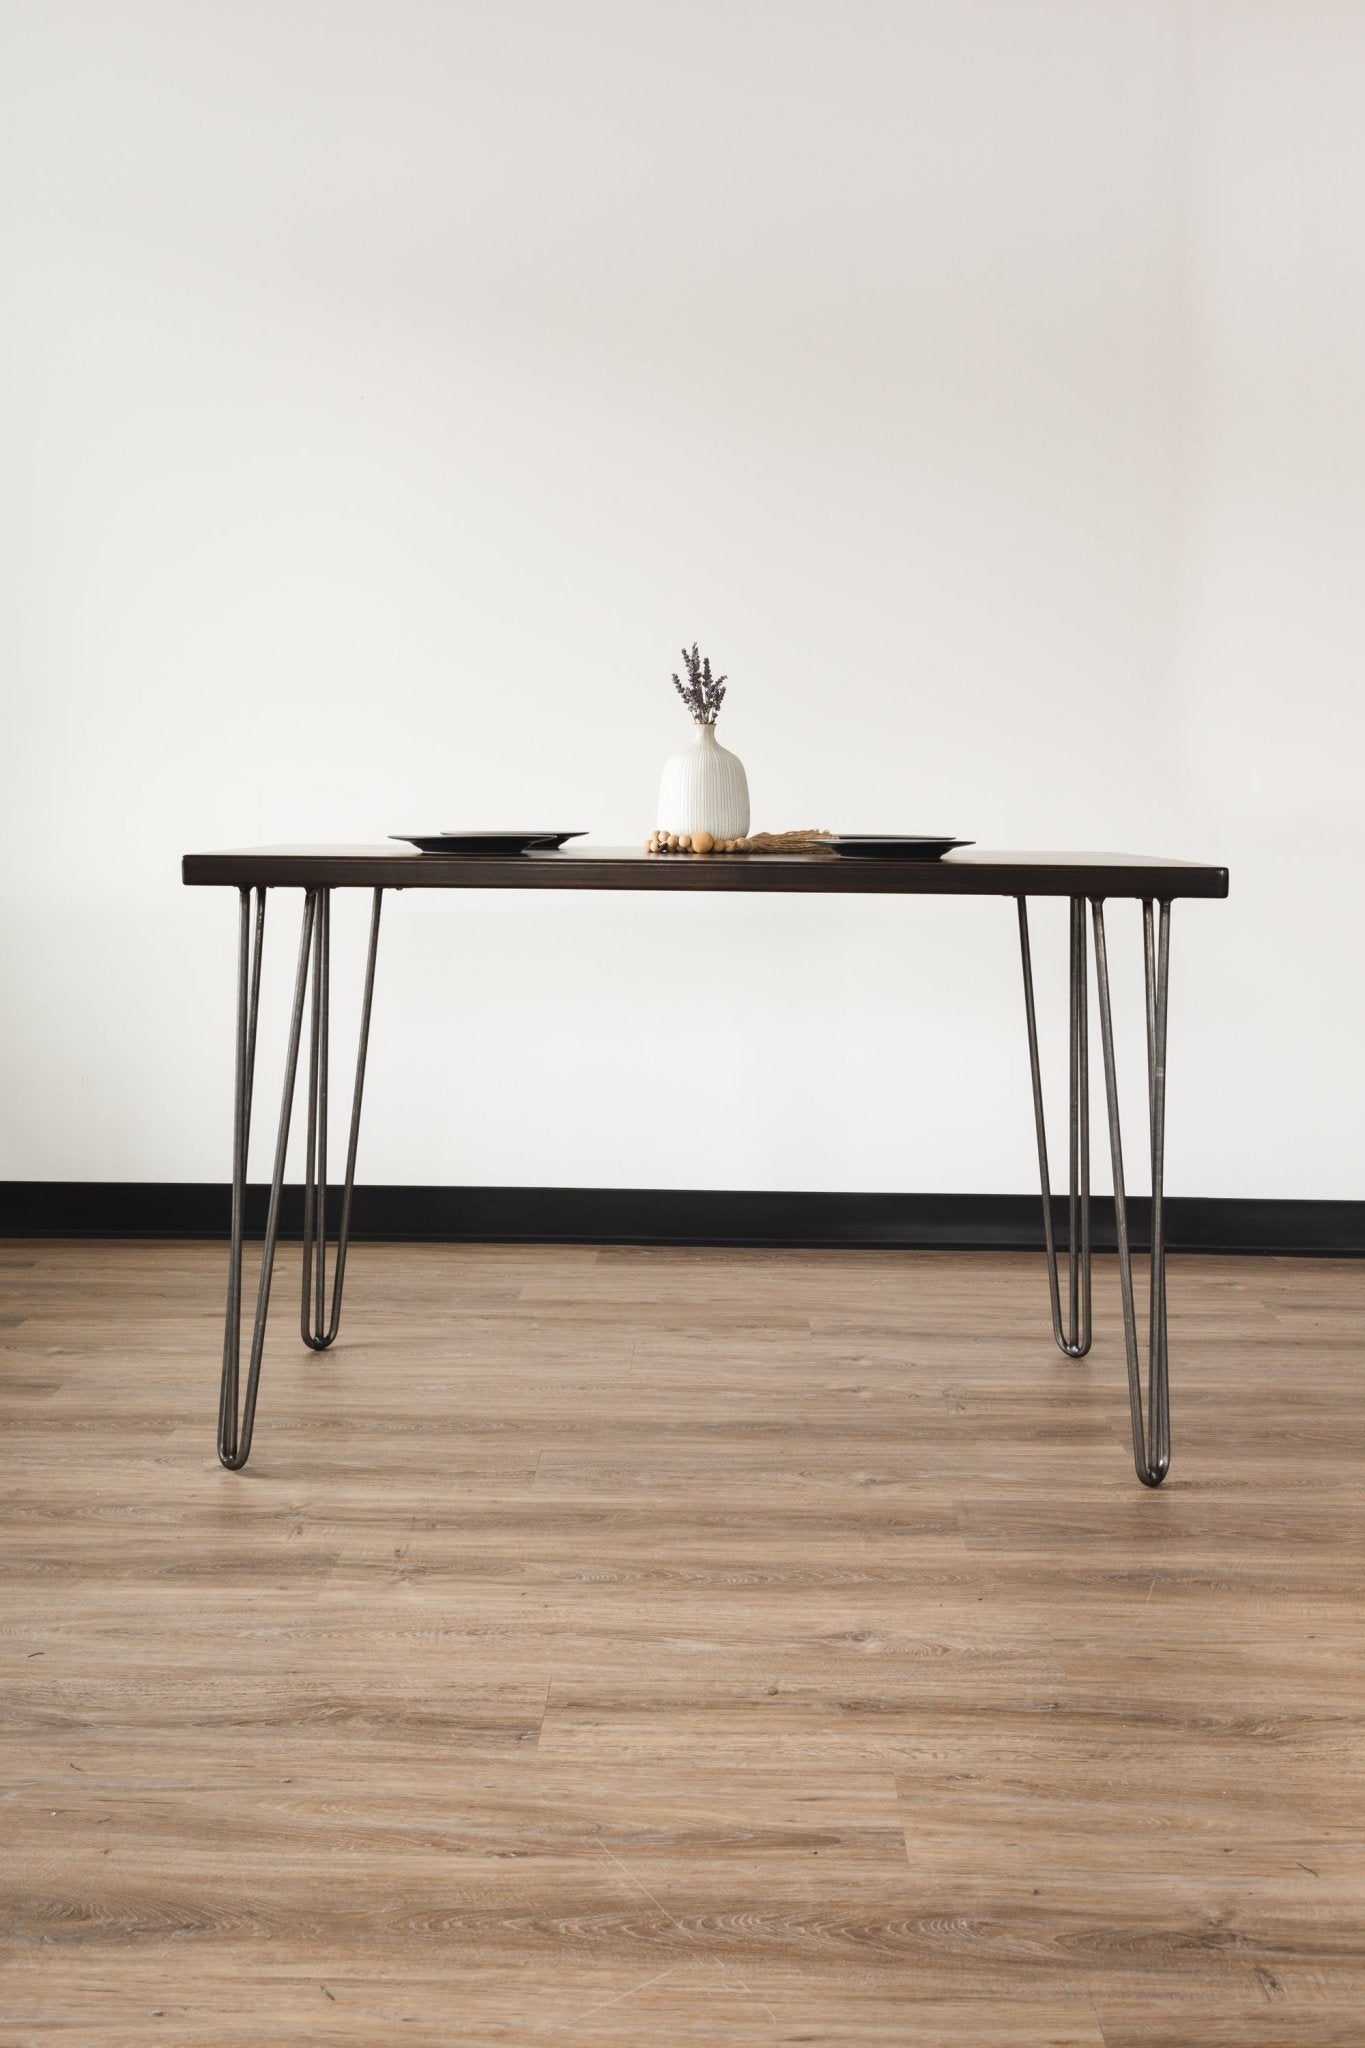 The Hairpin Dining Table - FargoWoodworks